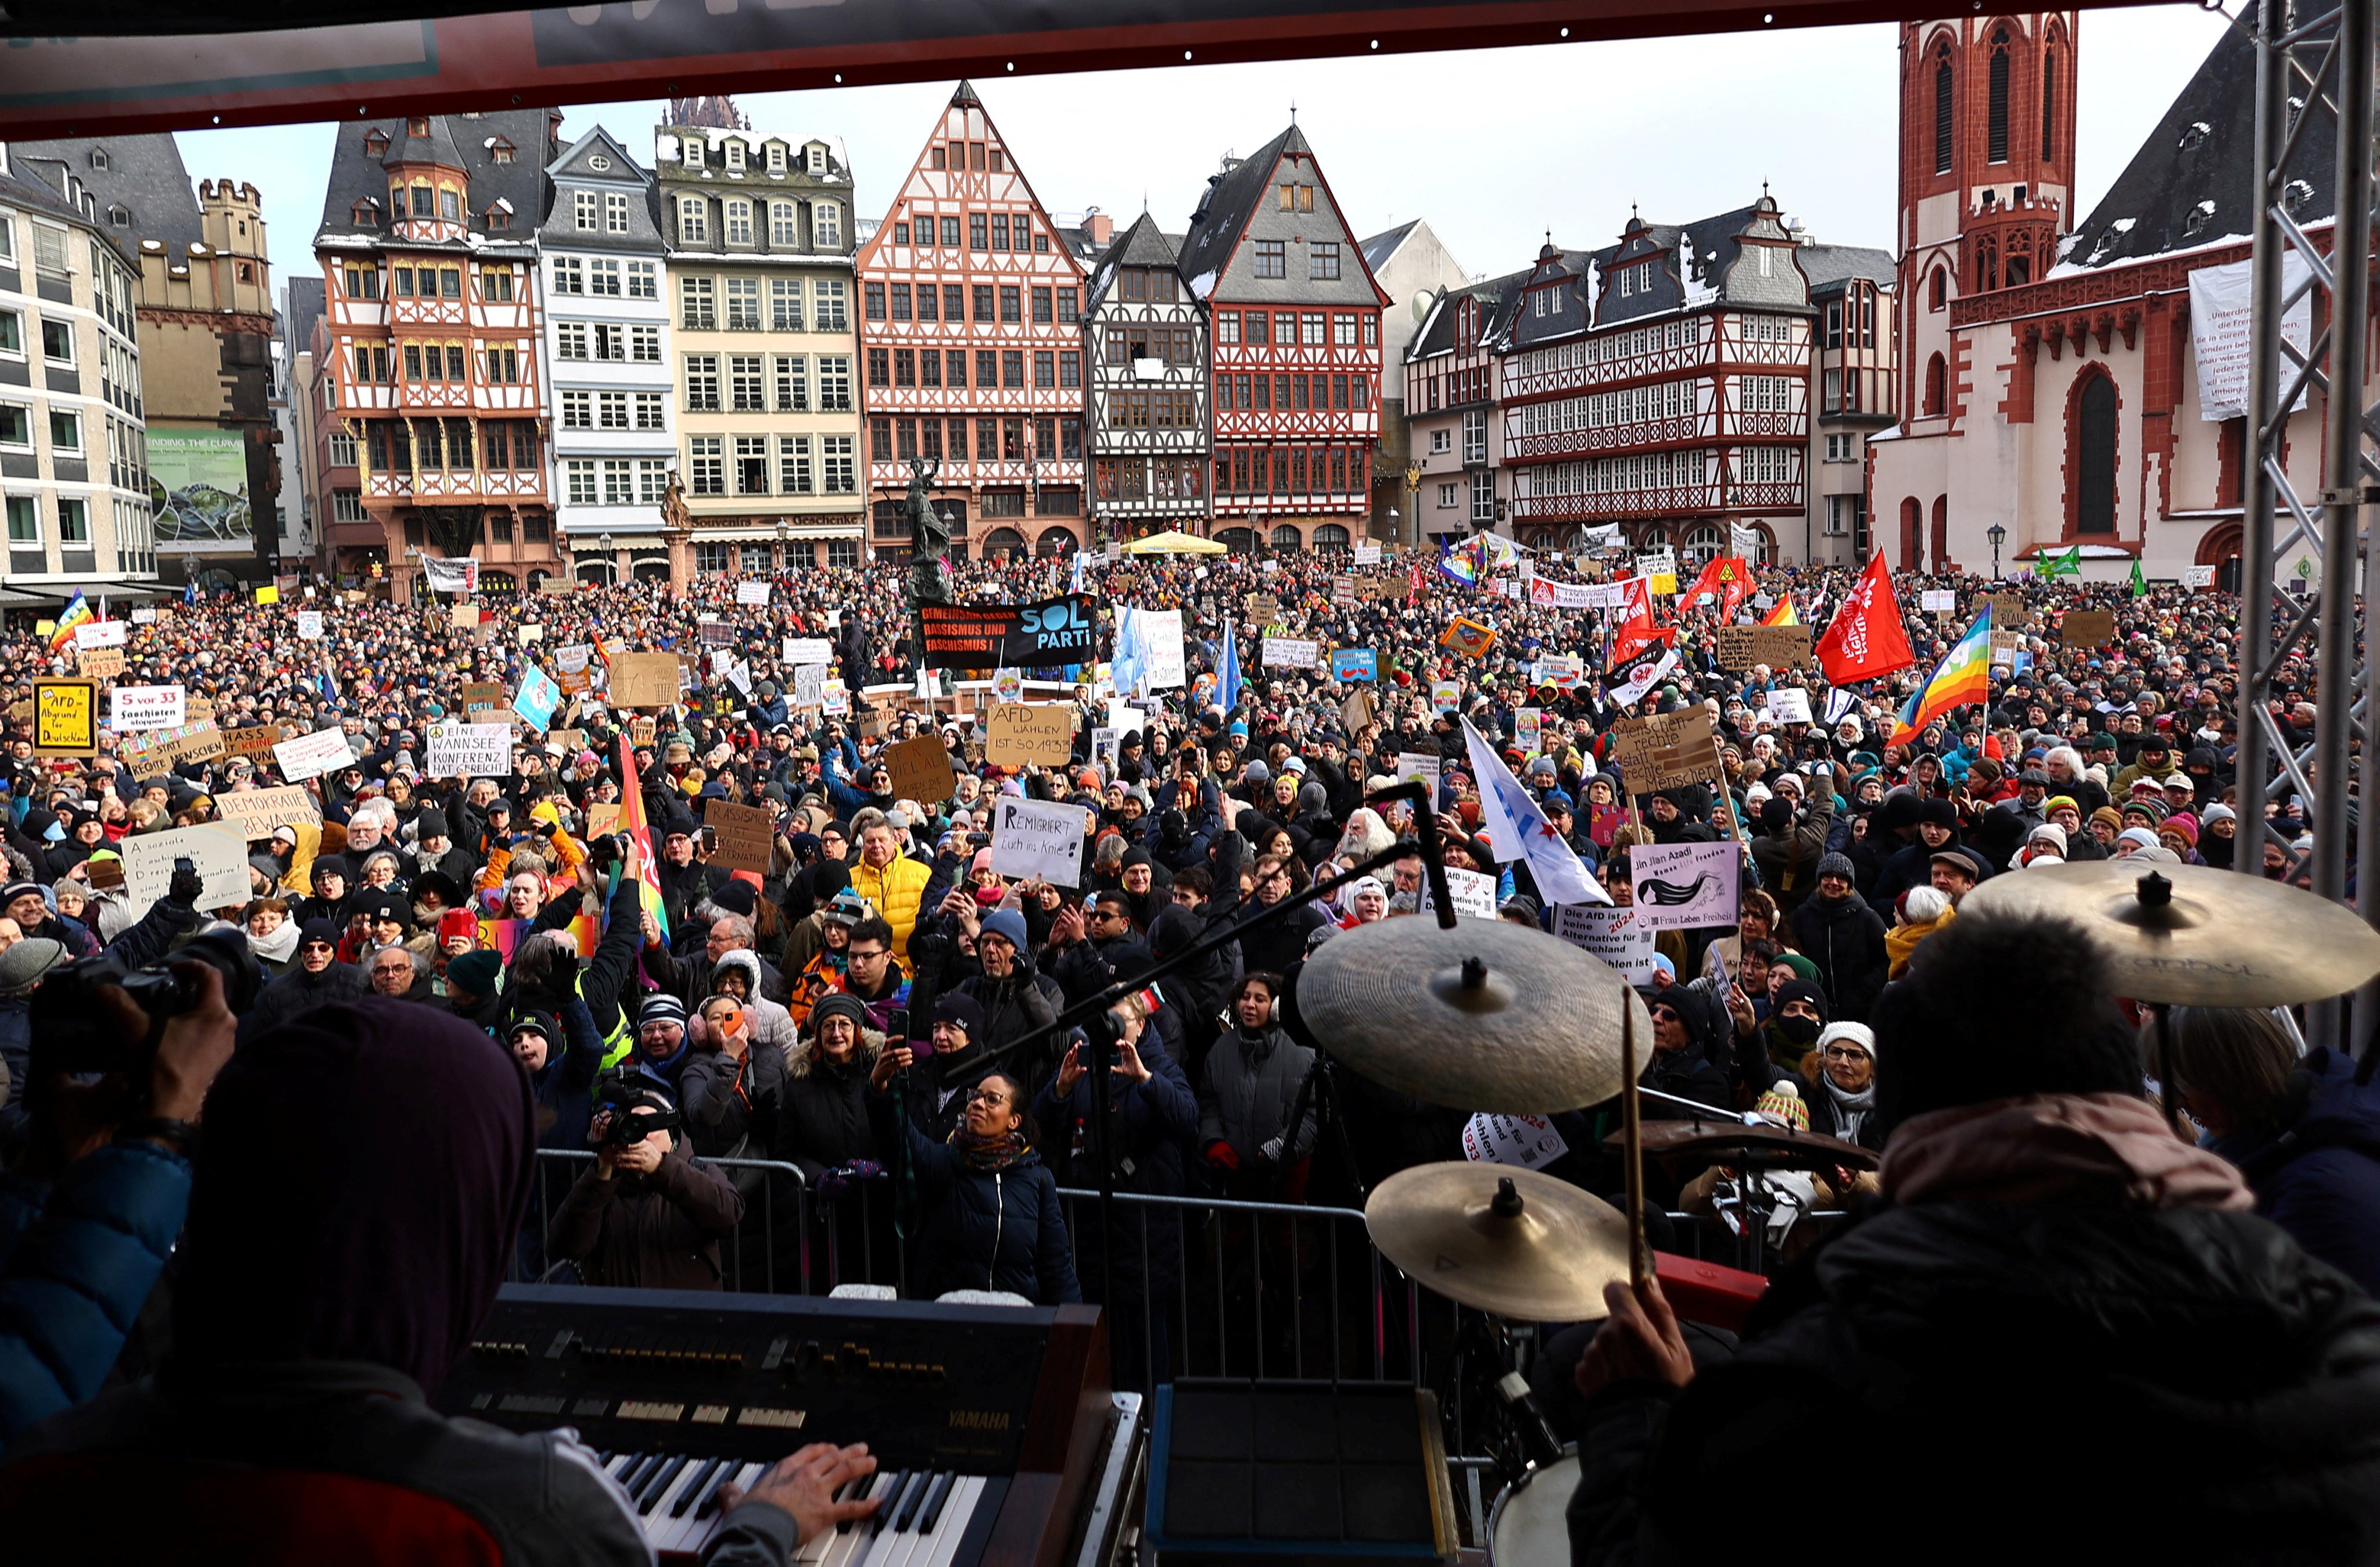 Musicians play as tens of thousands attend a protest against the Alternative for Germany (AfD) party, right-wing extremism and for the protection of democracy in Frankfurt, Germany on Saturday. Photo: Reuters